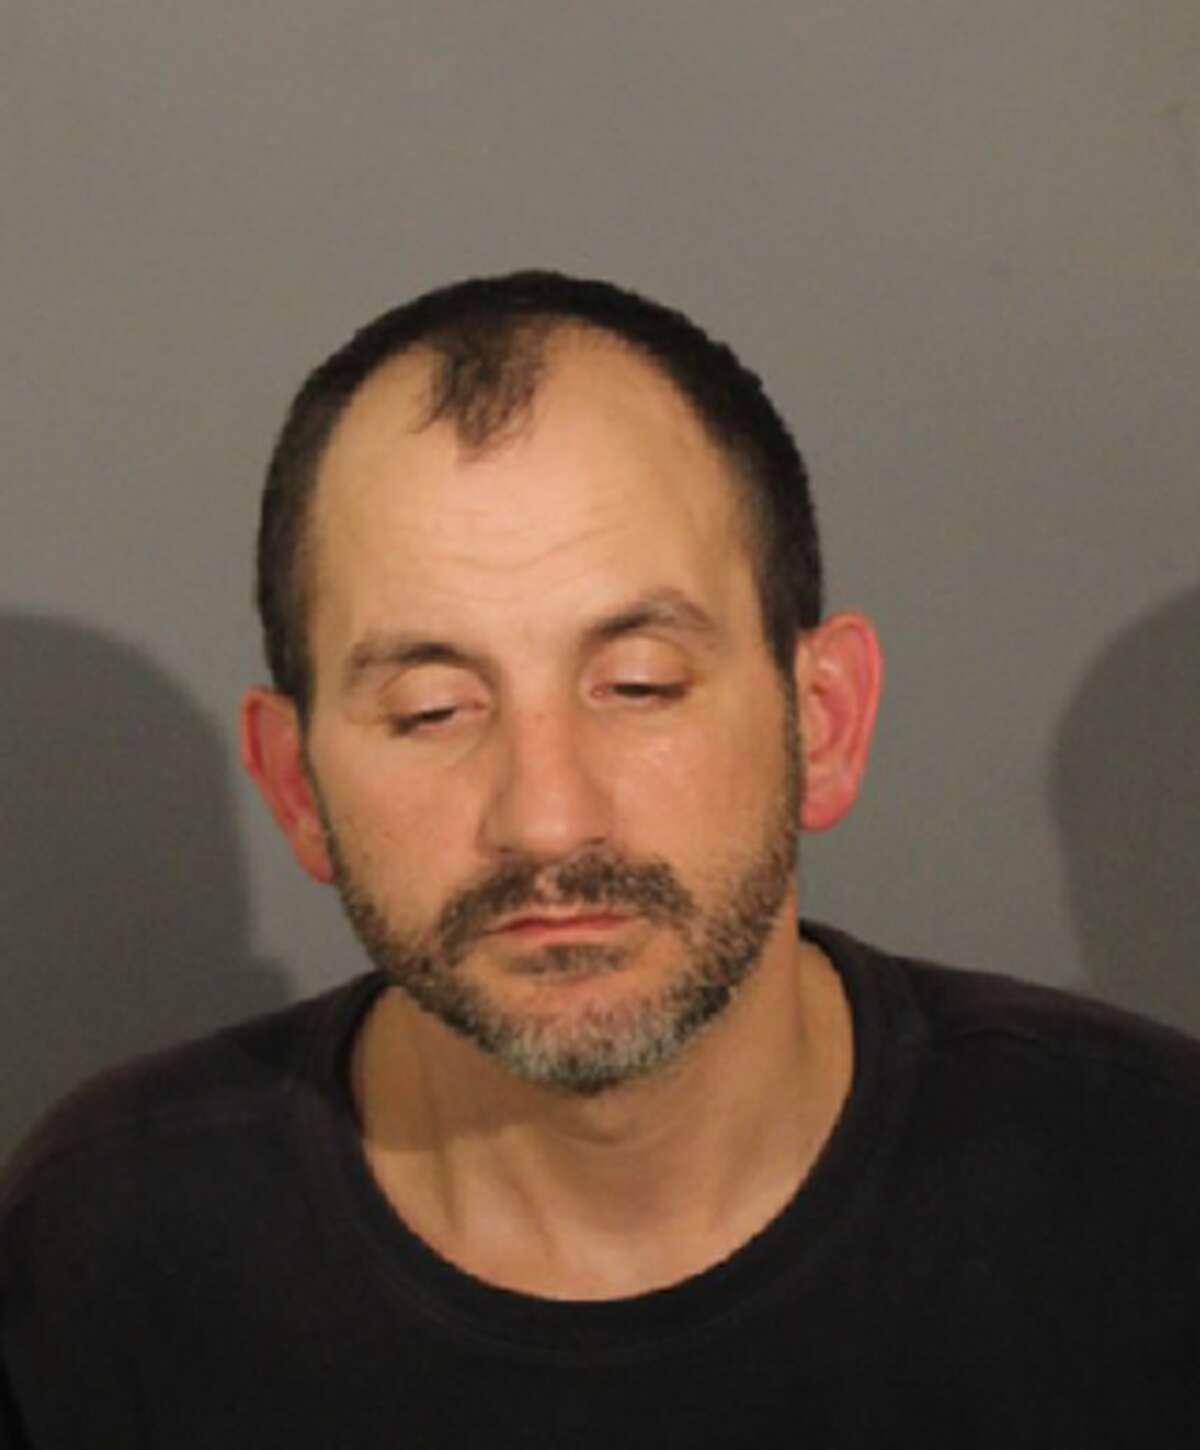 Jeremy Tamburri, 40, of Danbury, was arrested Thursday after investigators who suspected him of selling fentanyl found the drug, Xanax pills and other suspicious items on his person, according to Danbury police.